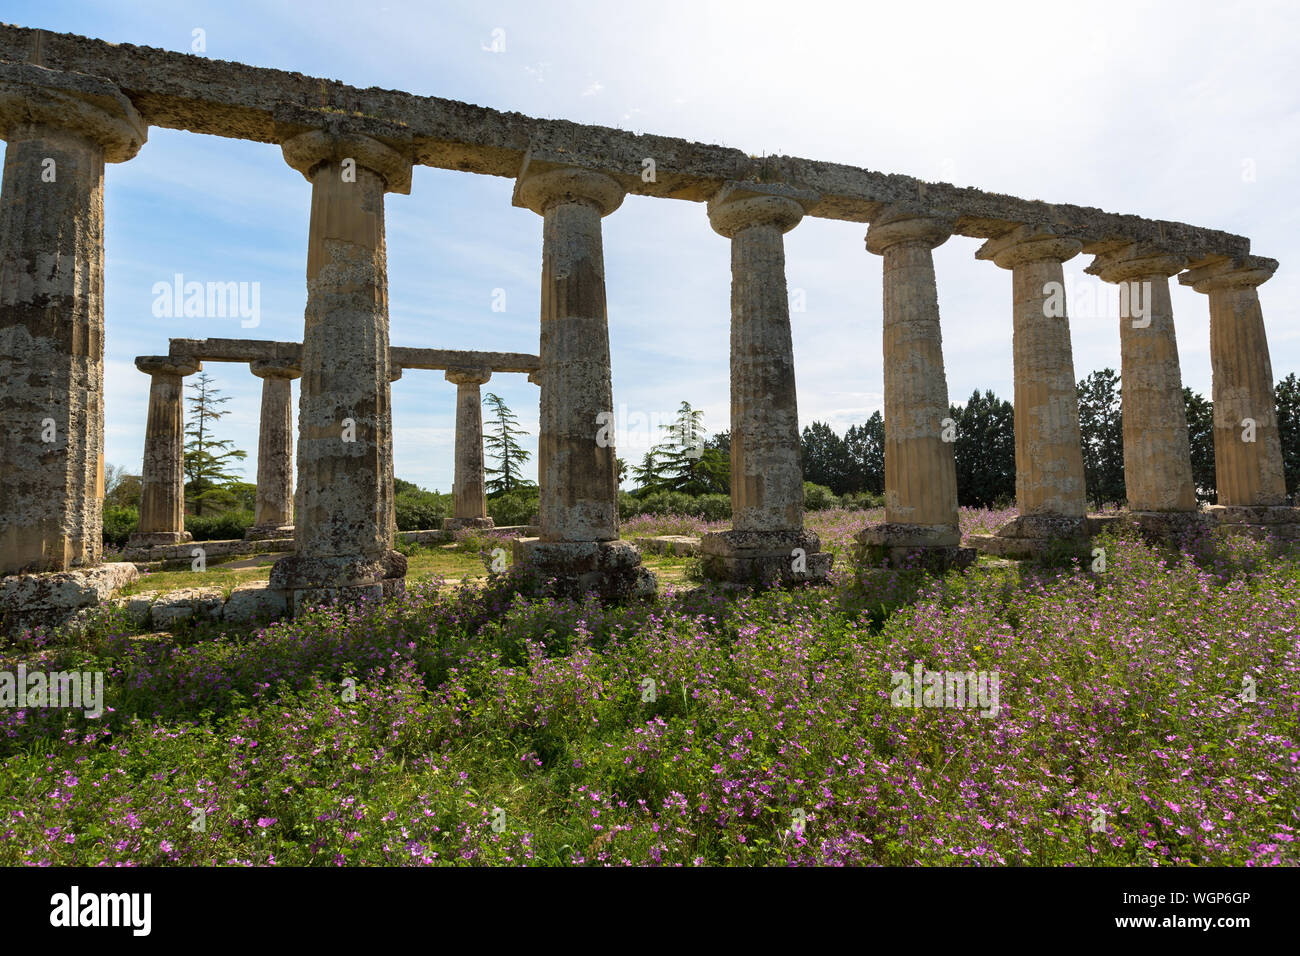 Ruins Of Architectural Columns Against Sky Stock Photo